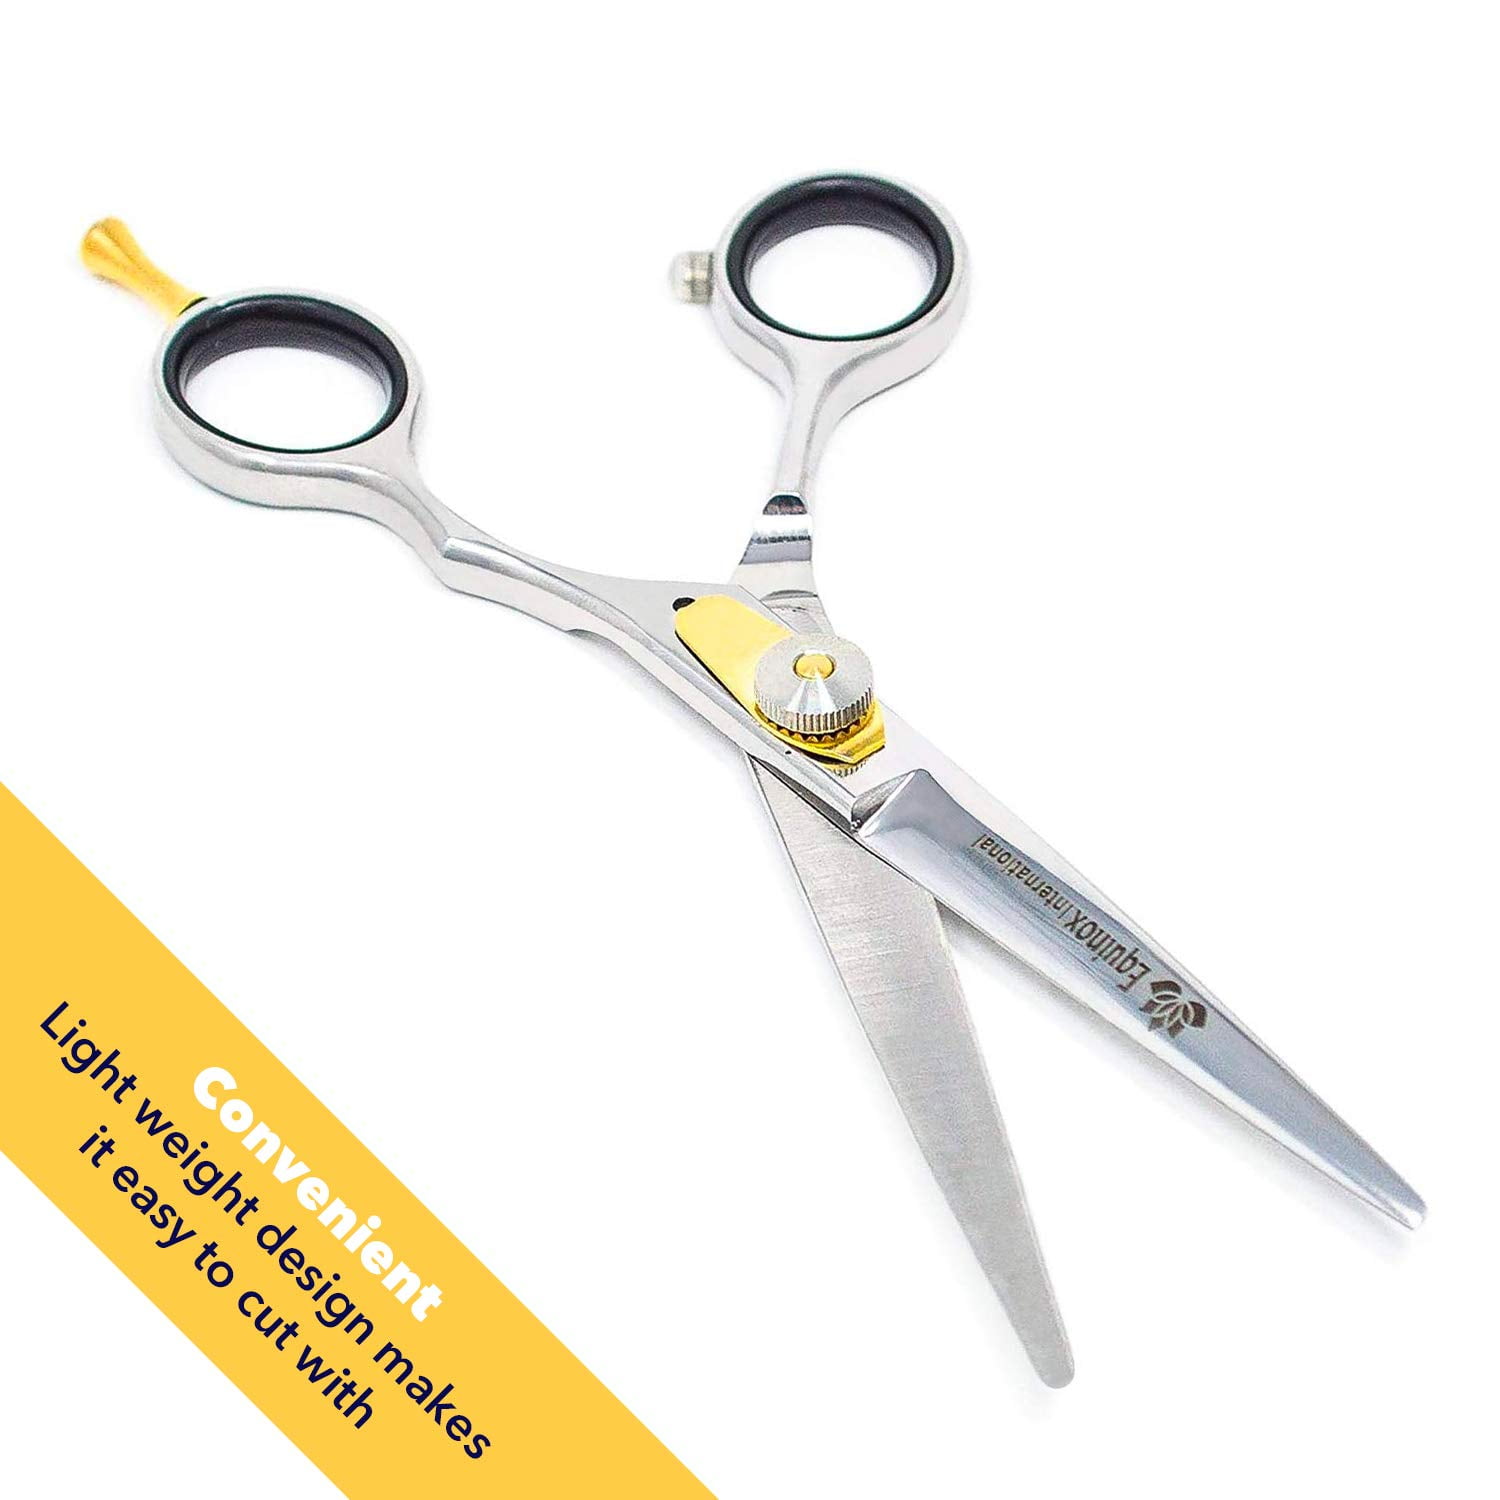  HB Professionals Hair Cutting And Hair Dressing Shears - 5.5  Inches - Premium Stainless Steel Scissors - Razor Edge Sharp Blades - For  Salons, Professional Barbers, Men & Women, Kids, Pets (